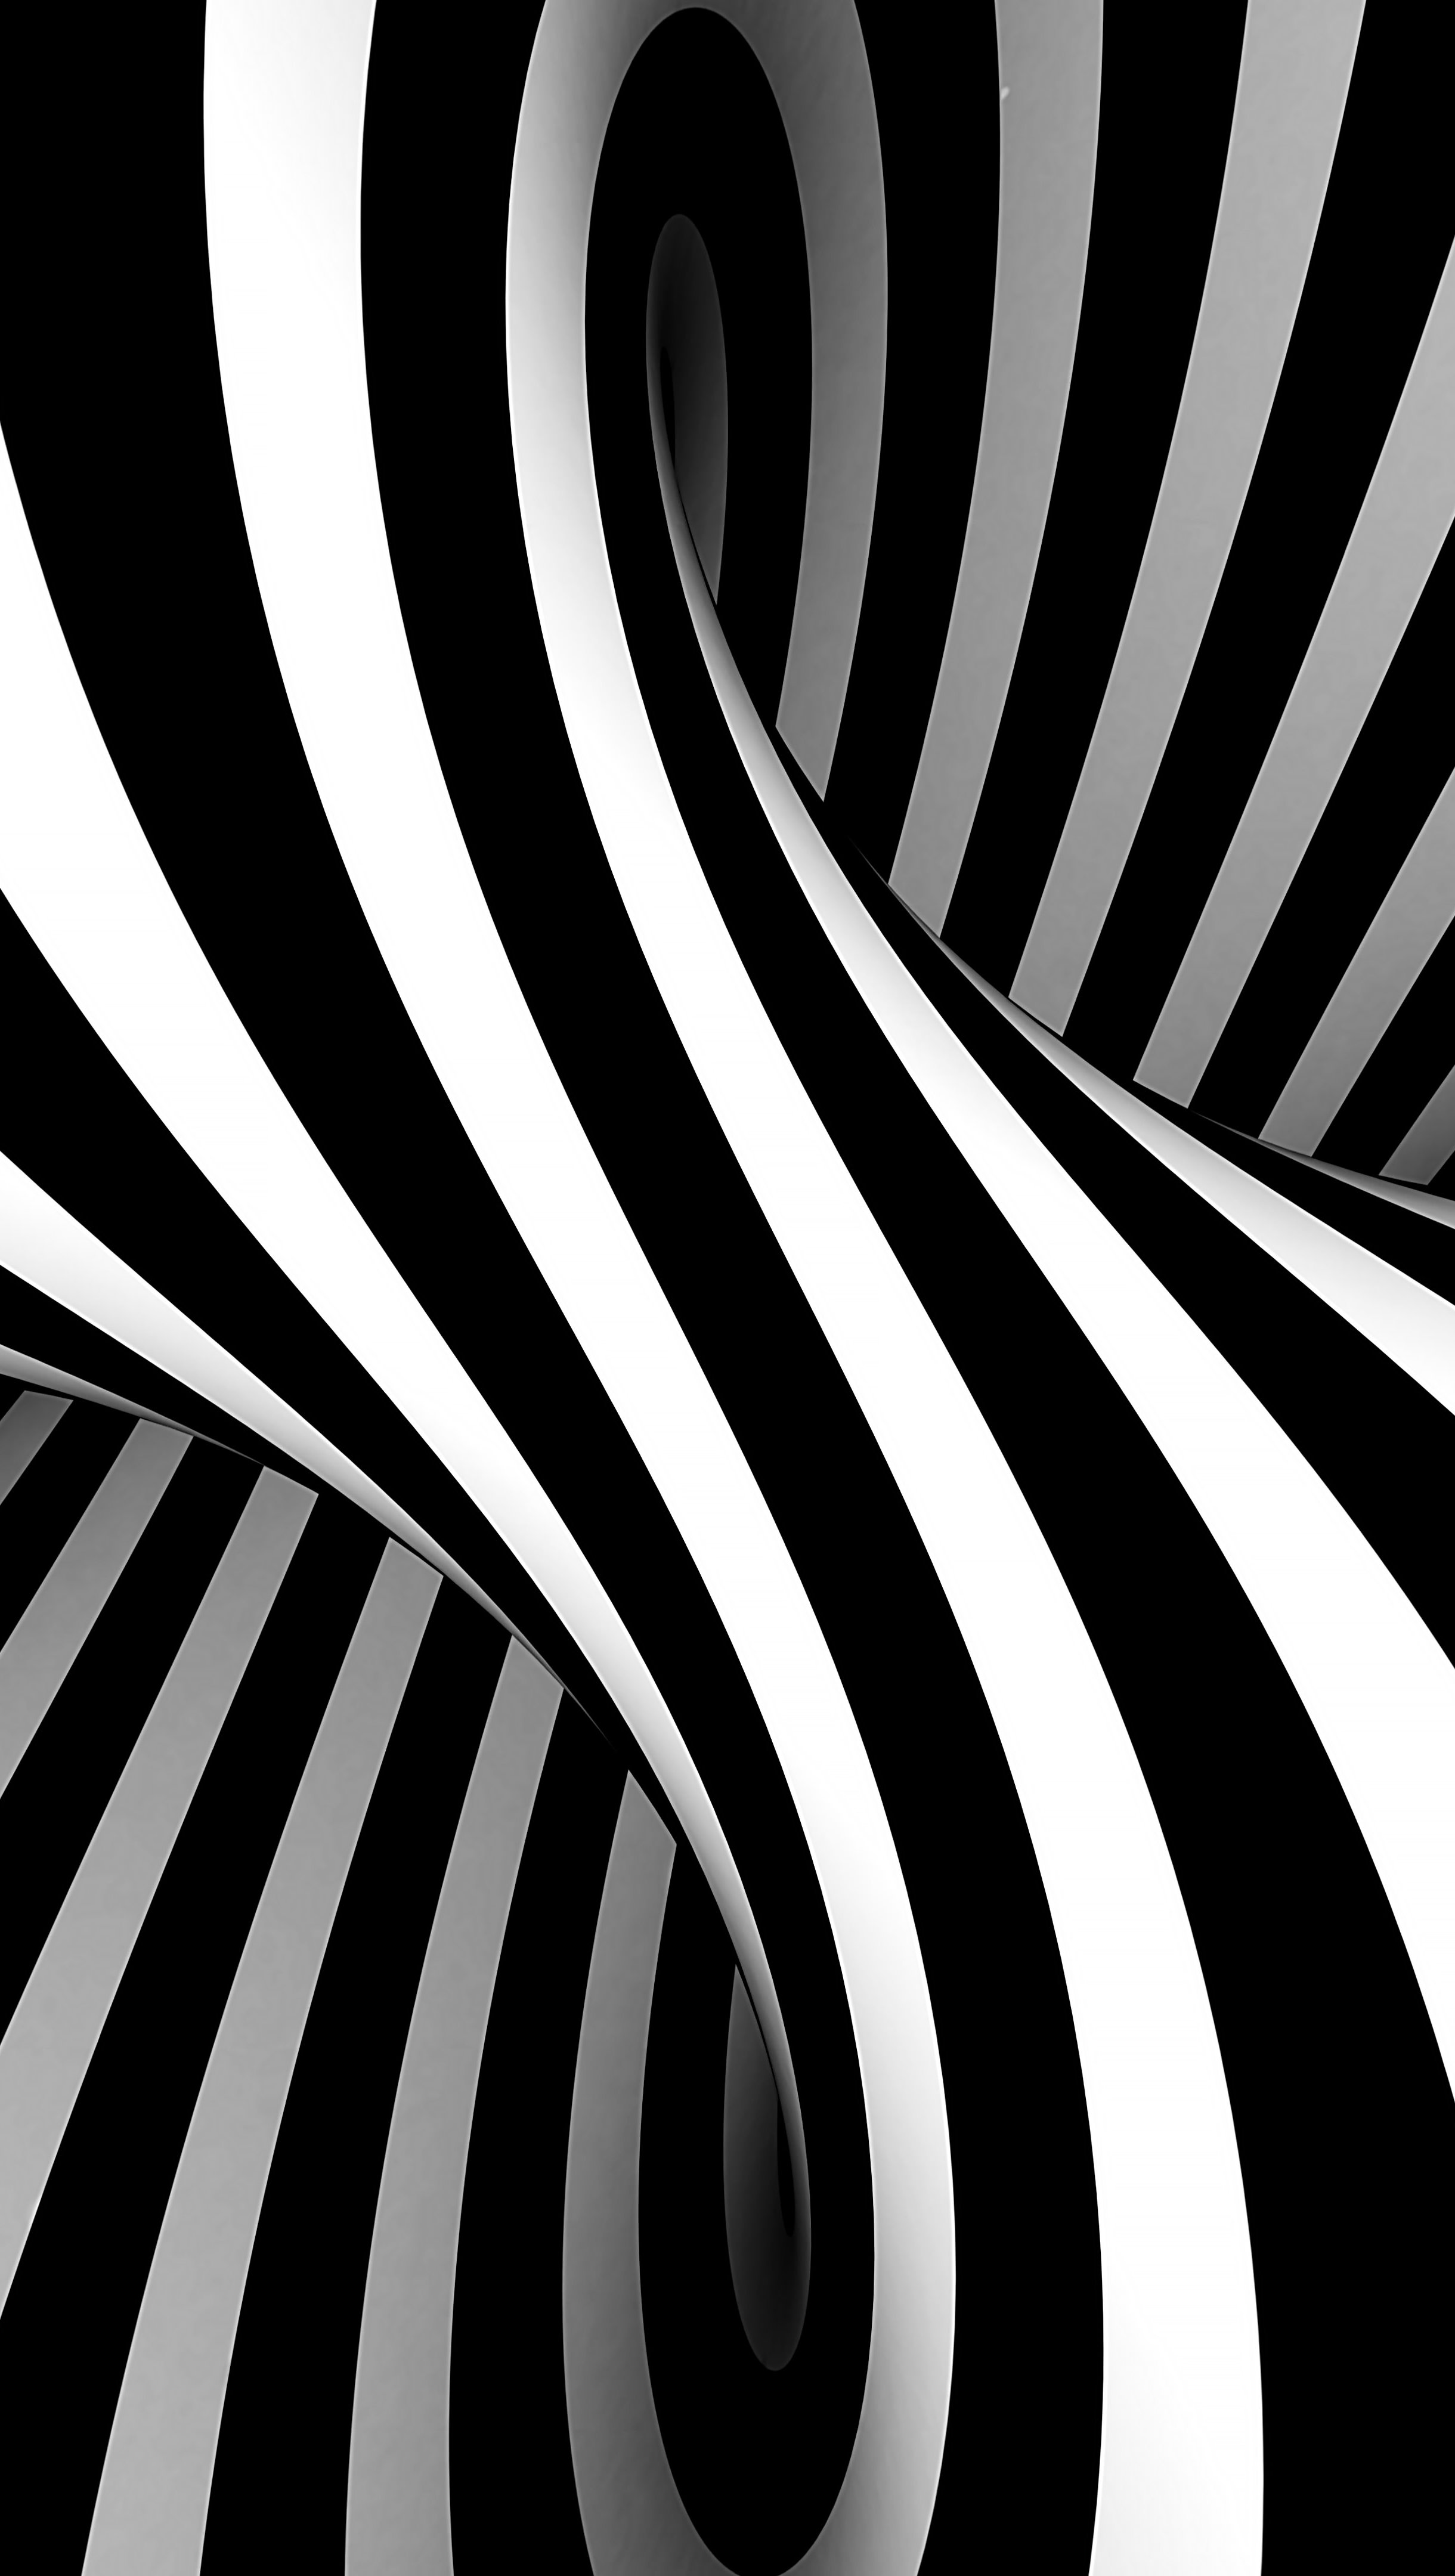 Vasarely style 3D black and white optical illusion Wallpaper 8k Ultra HD